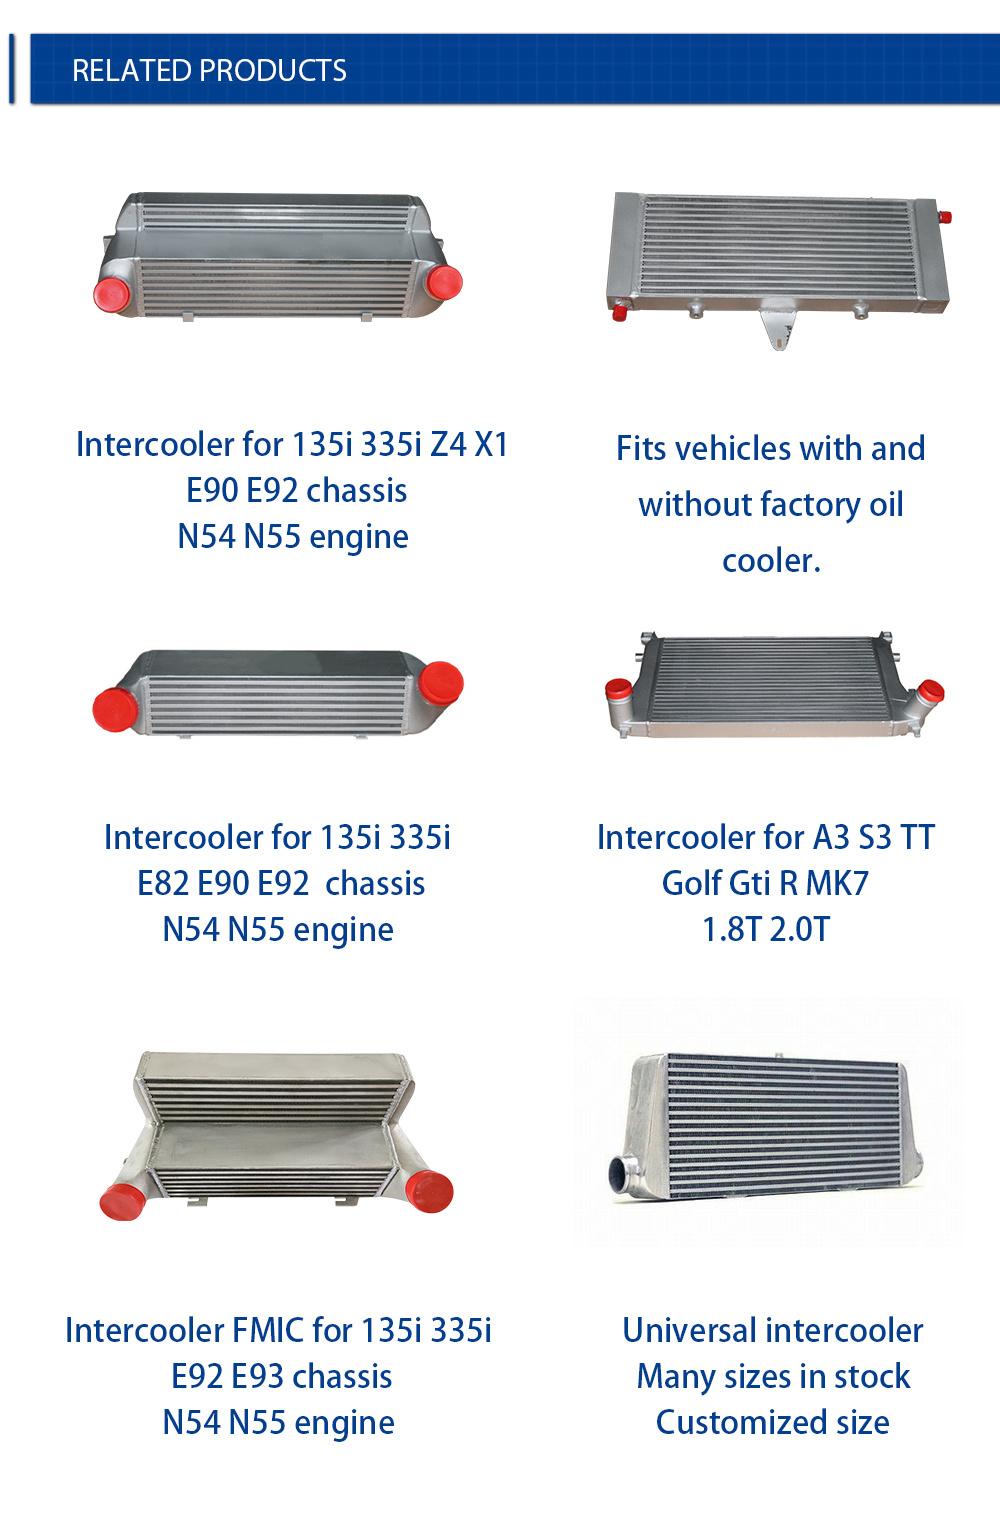 Car Aluminum Alloy Intercooler Is Suitable for M3 M4 and S55 Engine F80 F82 F83 F87 Chassis